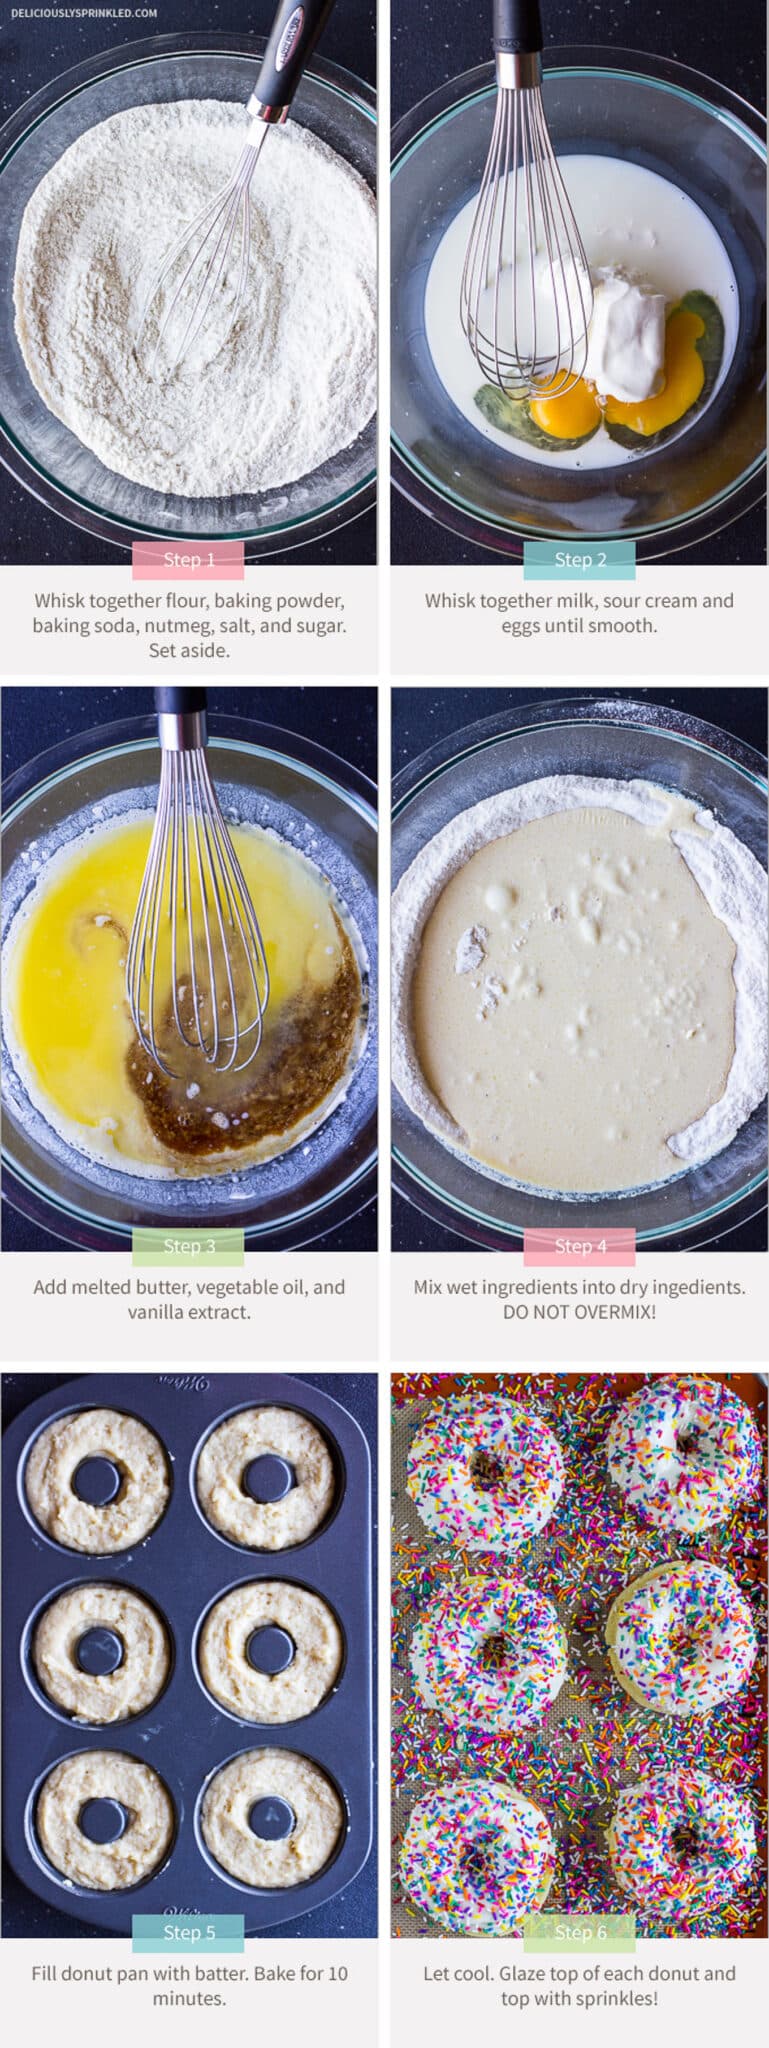 A collage showing mixing up the ingredients to make donuts, pouring them into the baking pan and then with the icing and sprinkles.